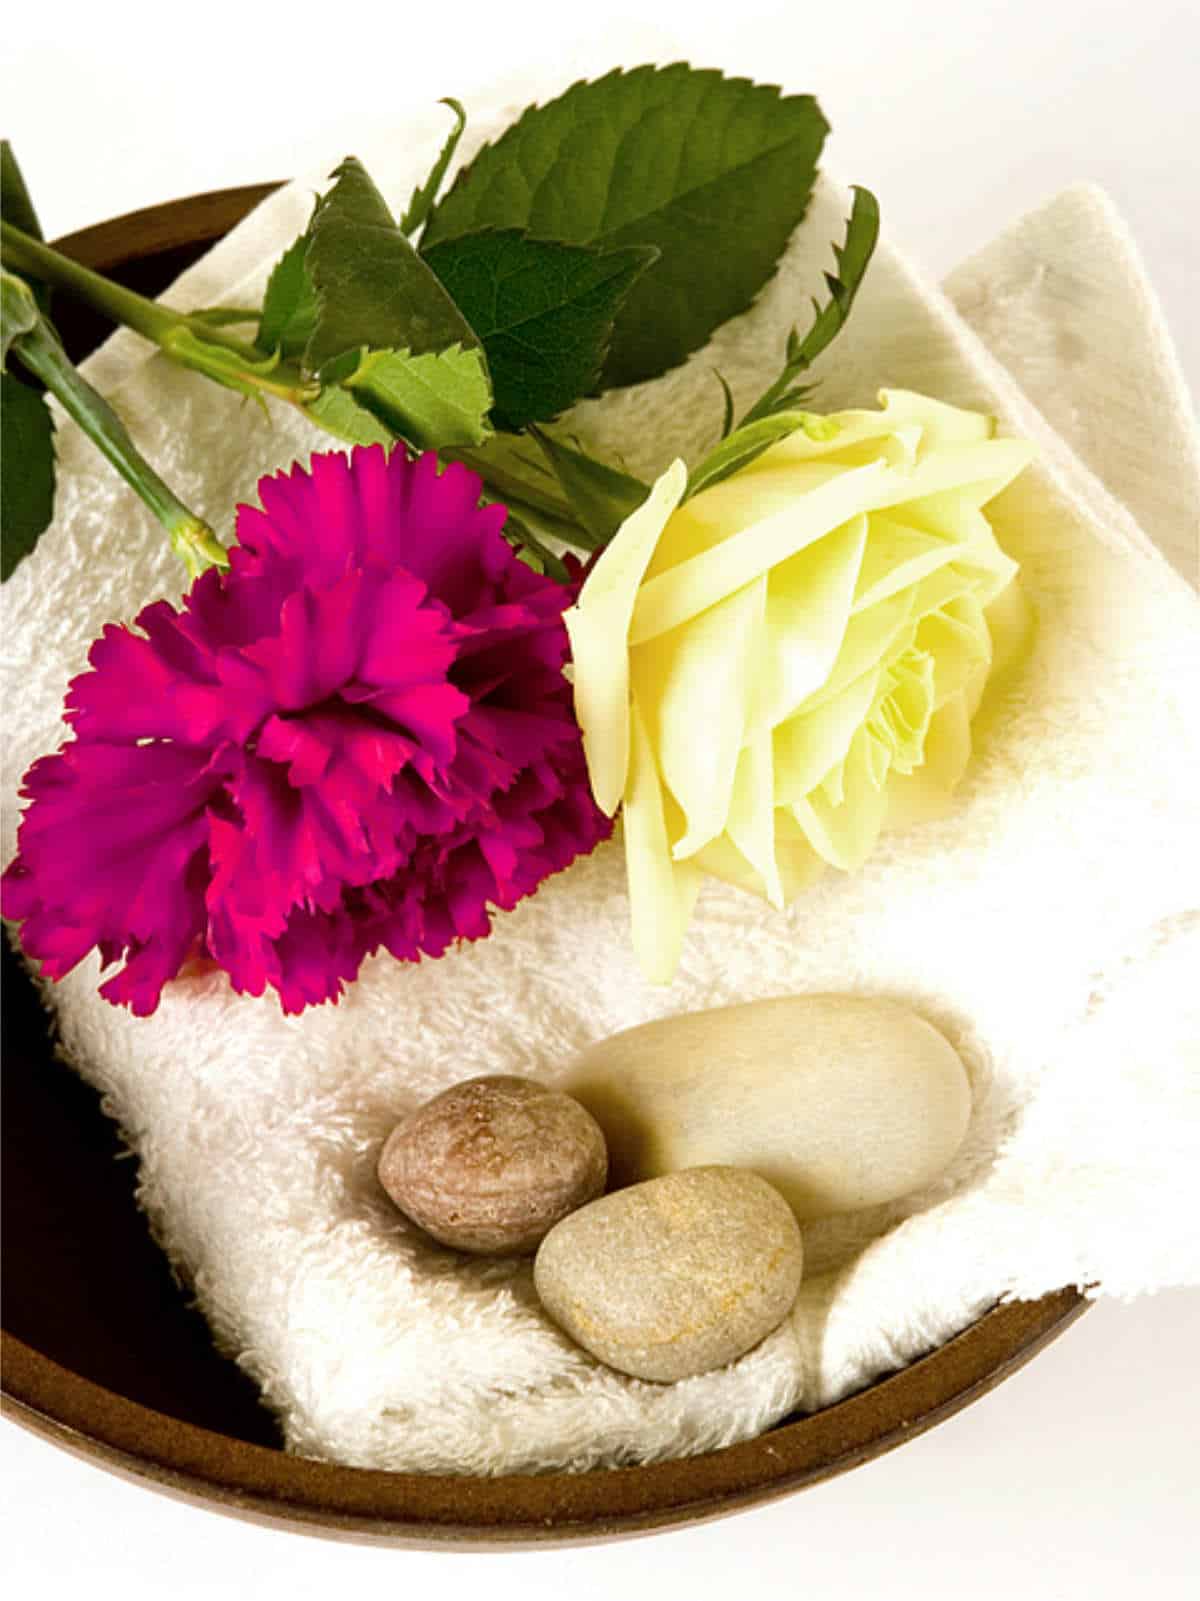 wooden bowl with white towel and scattered pebbles decorated with a white rose and magenta carnation.